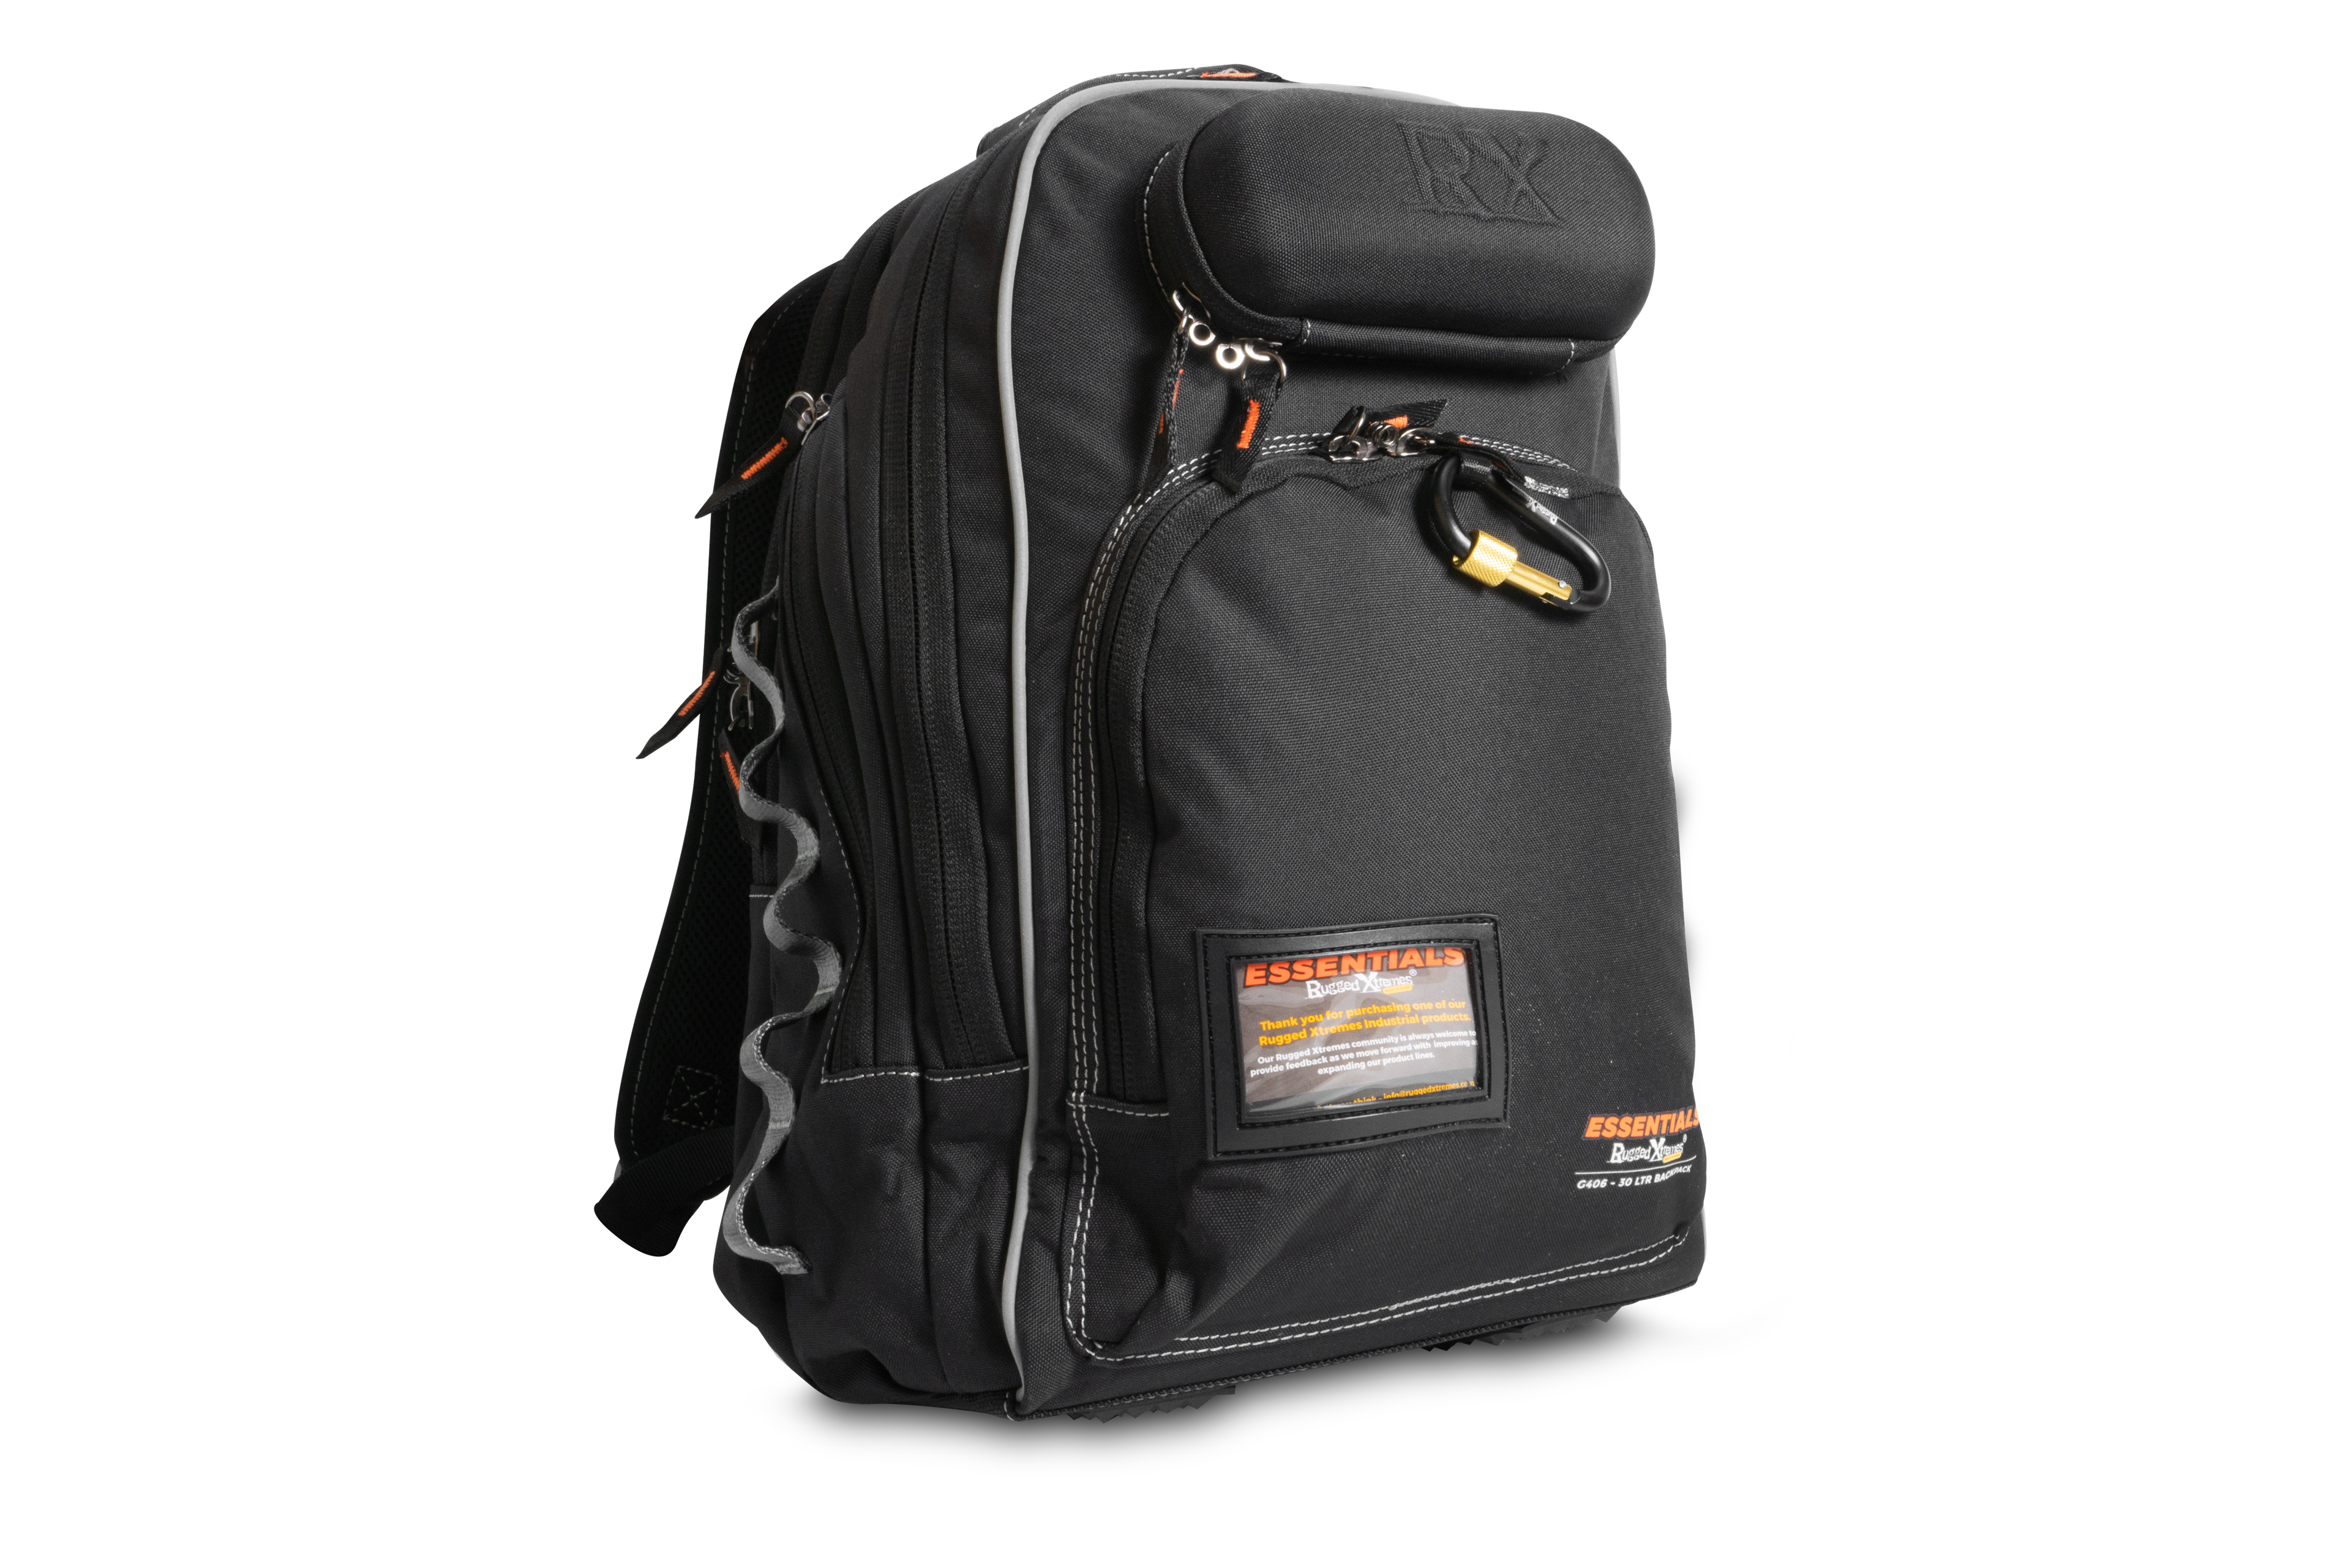 Rugged Xtremes Essentials Laptop/Travel Backpack